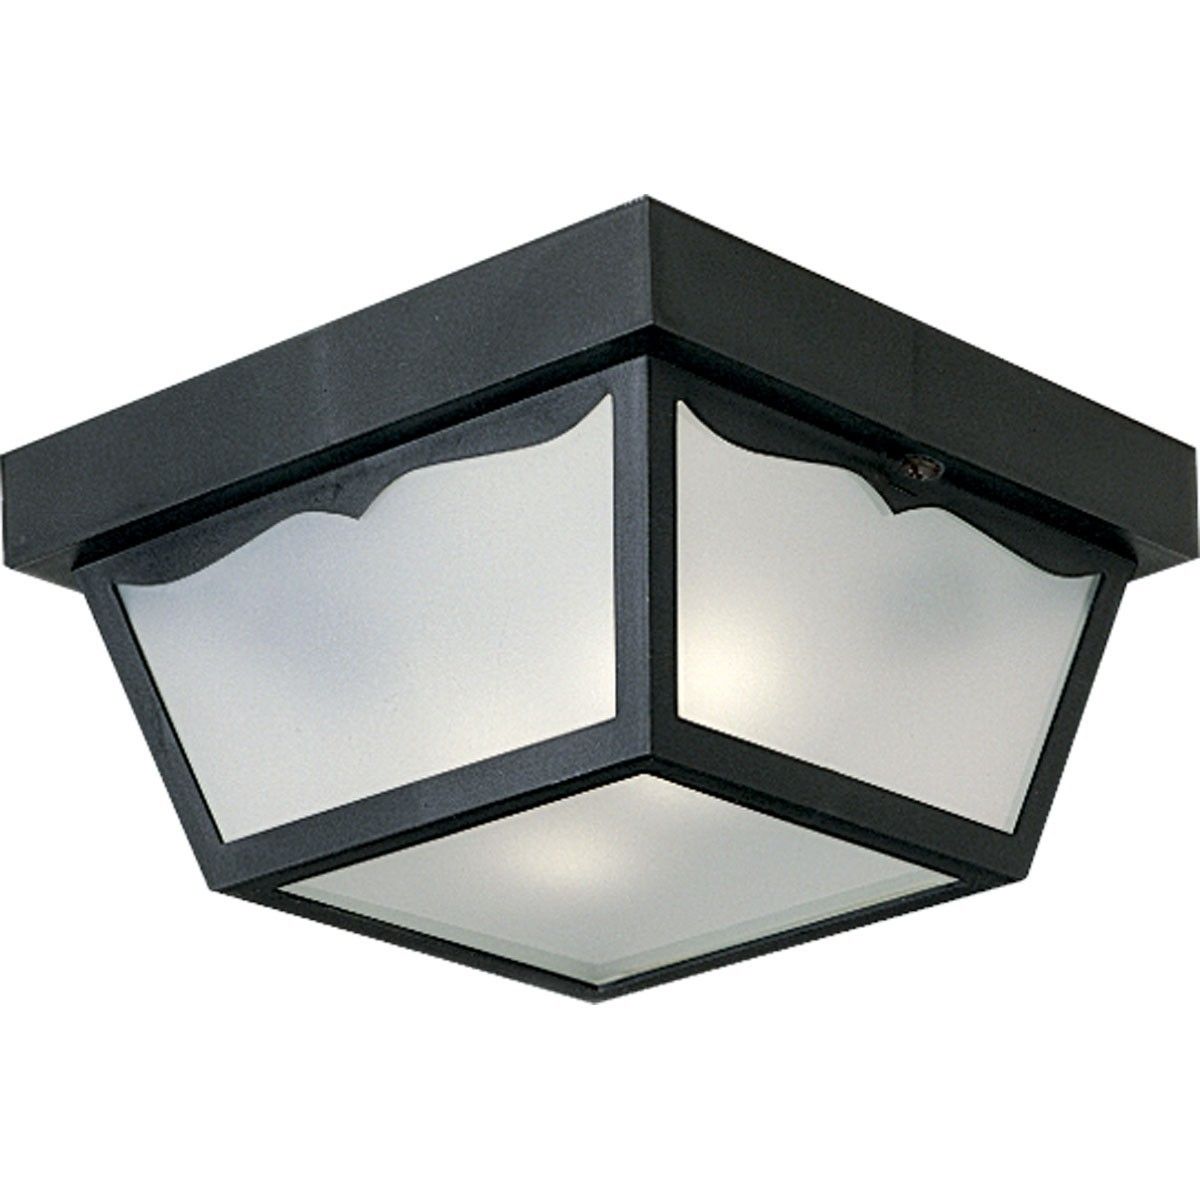 60w Outdoor Flush Mount Non Metallic Ceiling Light – Progress Pertaining To Outdoor Ceiling Lights (View 2 of 15)